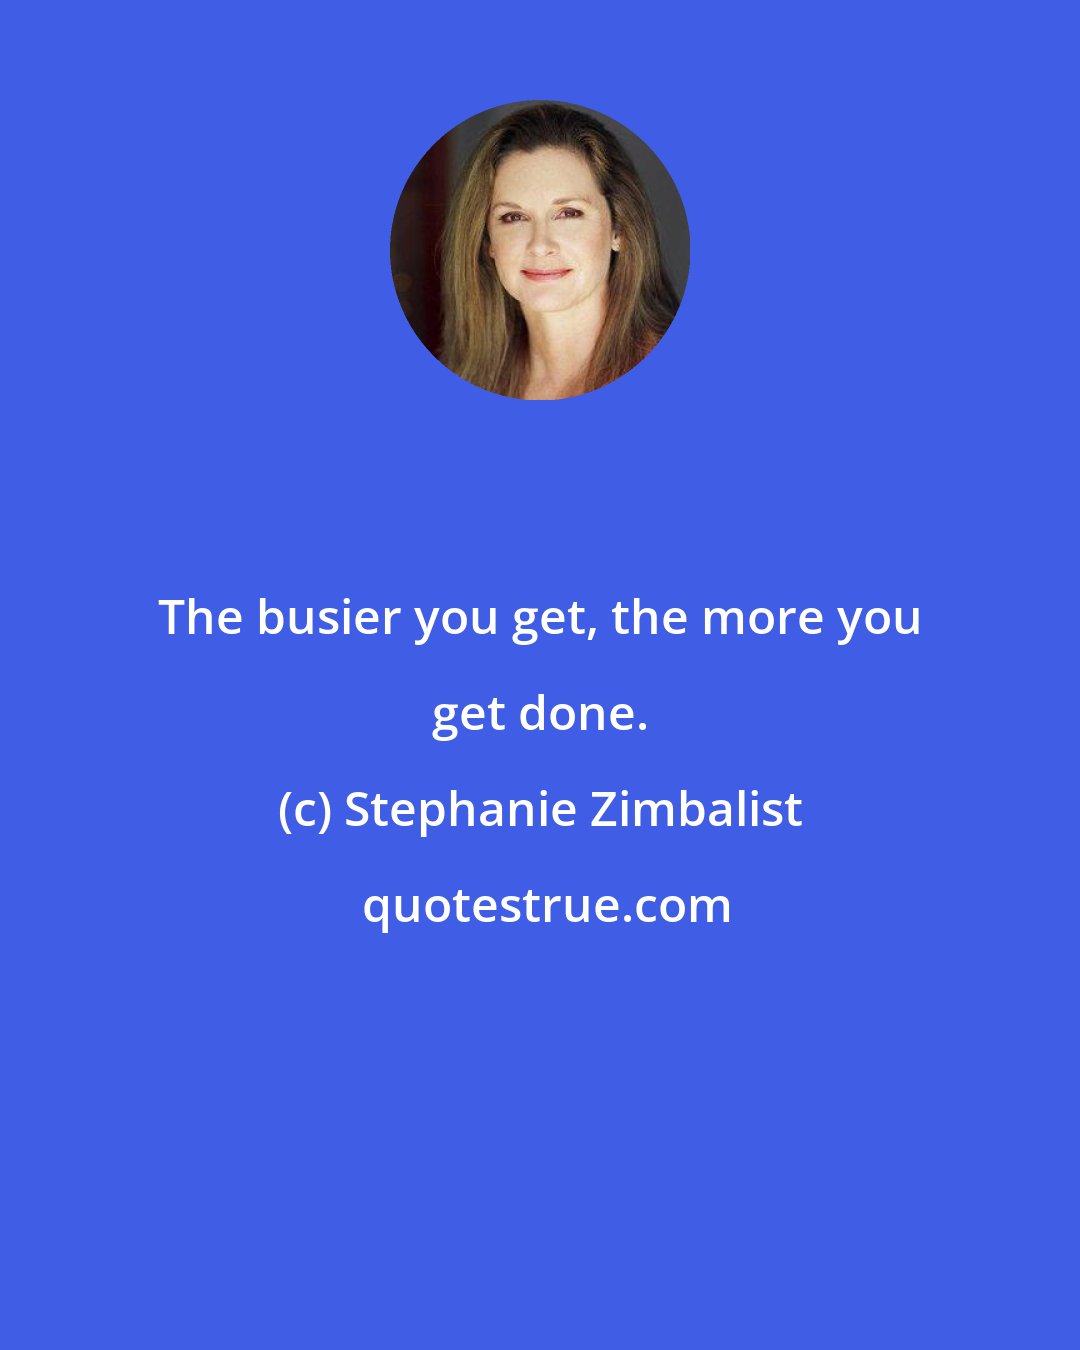 Stephanie Zimbalist: The busier you get, the more you get done.